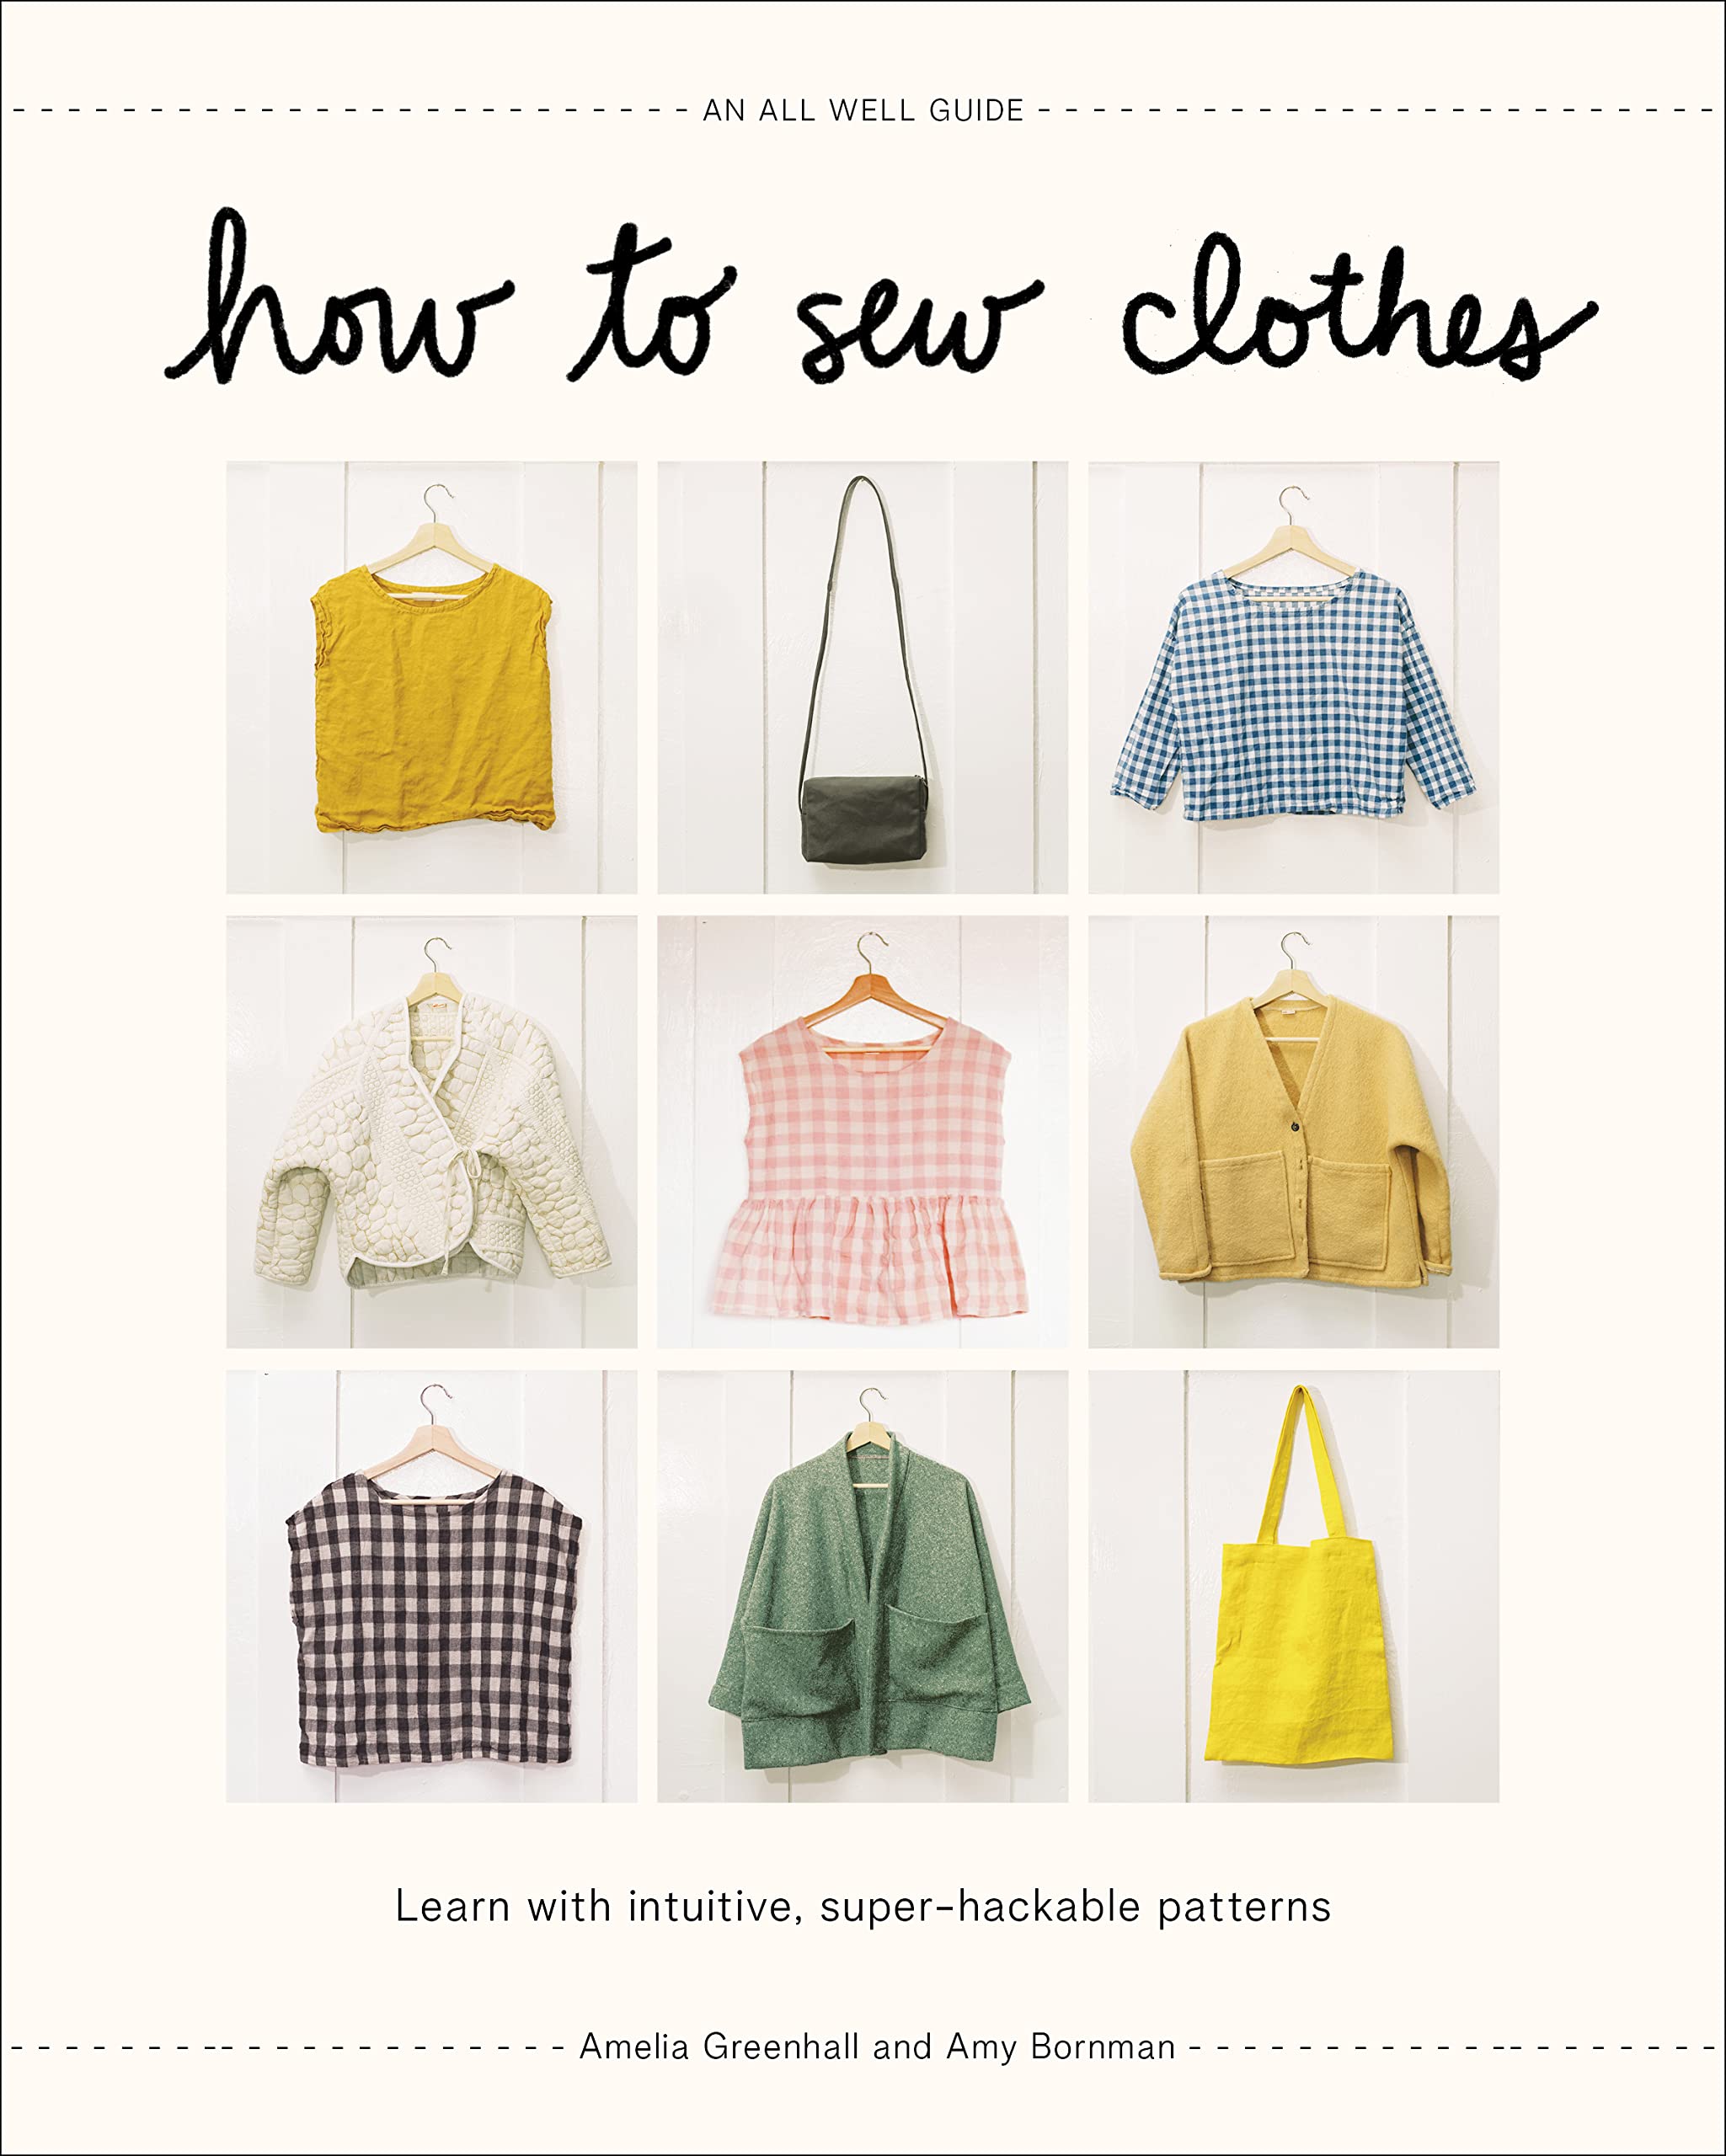 A Beginner's Guide to Making Your Own Clothes - The Sewing Directory